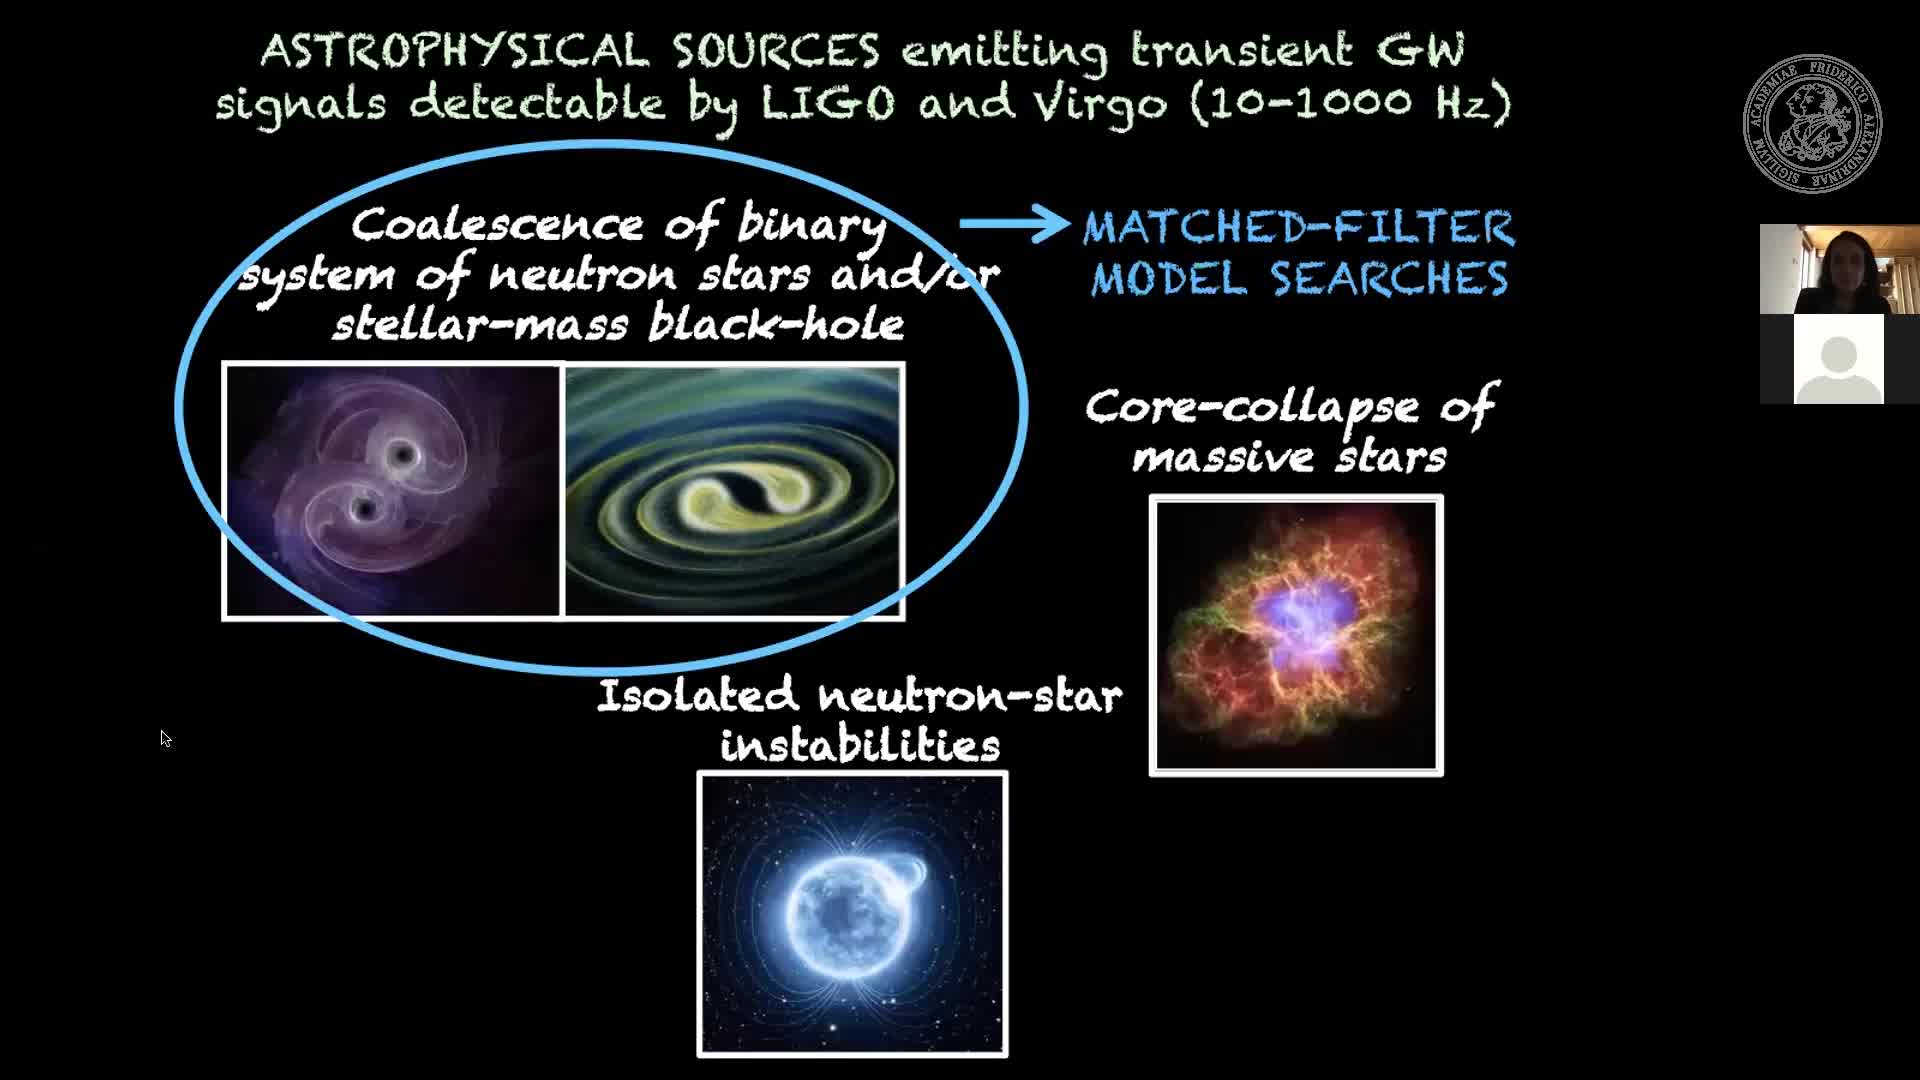 03 June 2020: Marica Branchesi (Gran Sasso Science Institute): Multi-messenger astronomy including gravitational-wave preview image